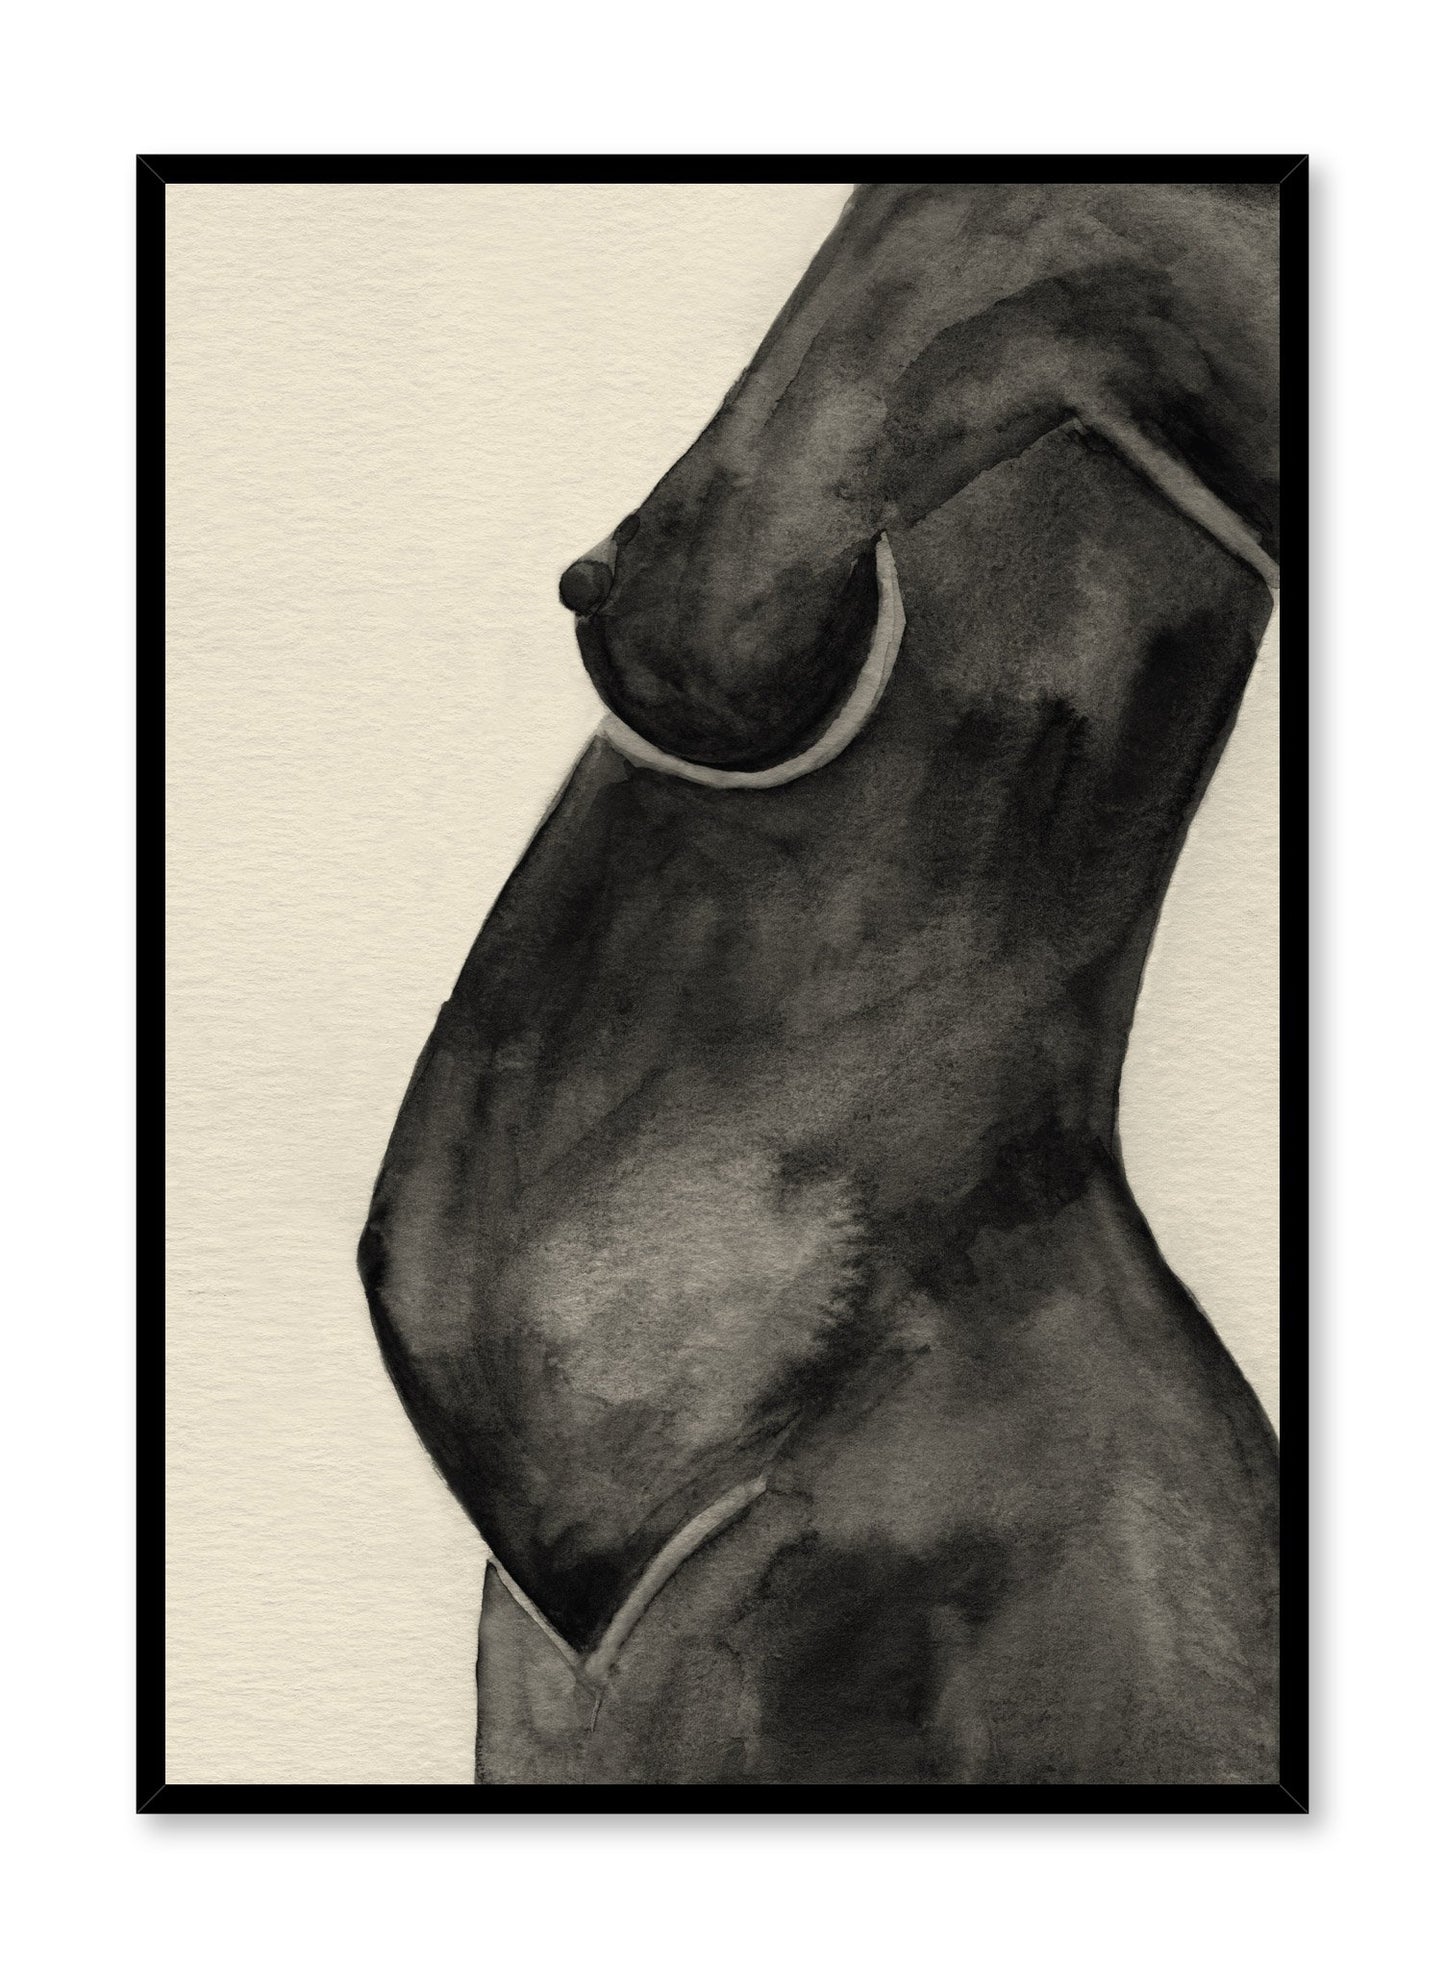 "Magnificent Mama" is a minimalist black and beige illustration poster by Opposite Wall of pregnant and abstract female silhouette over a beige background.